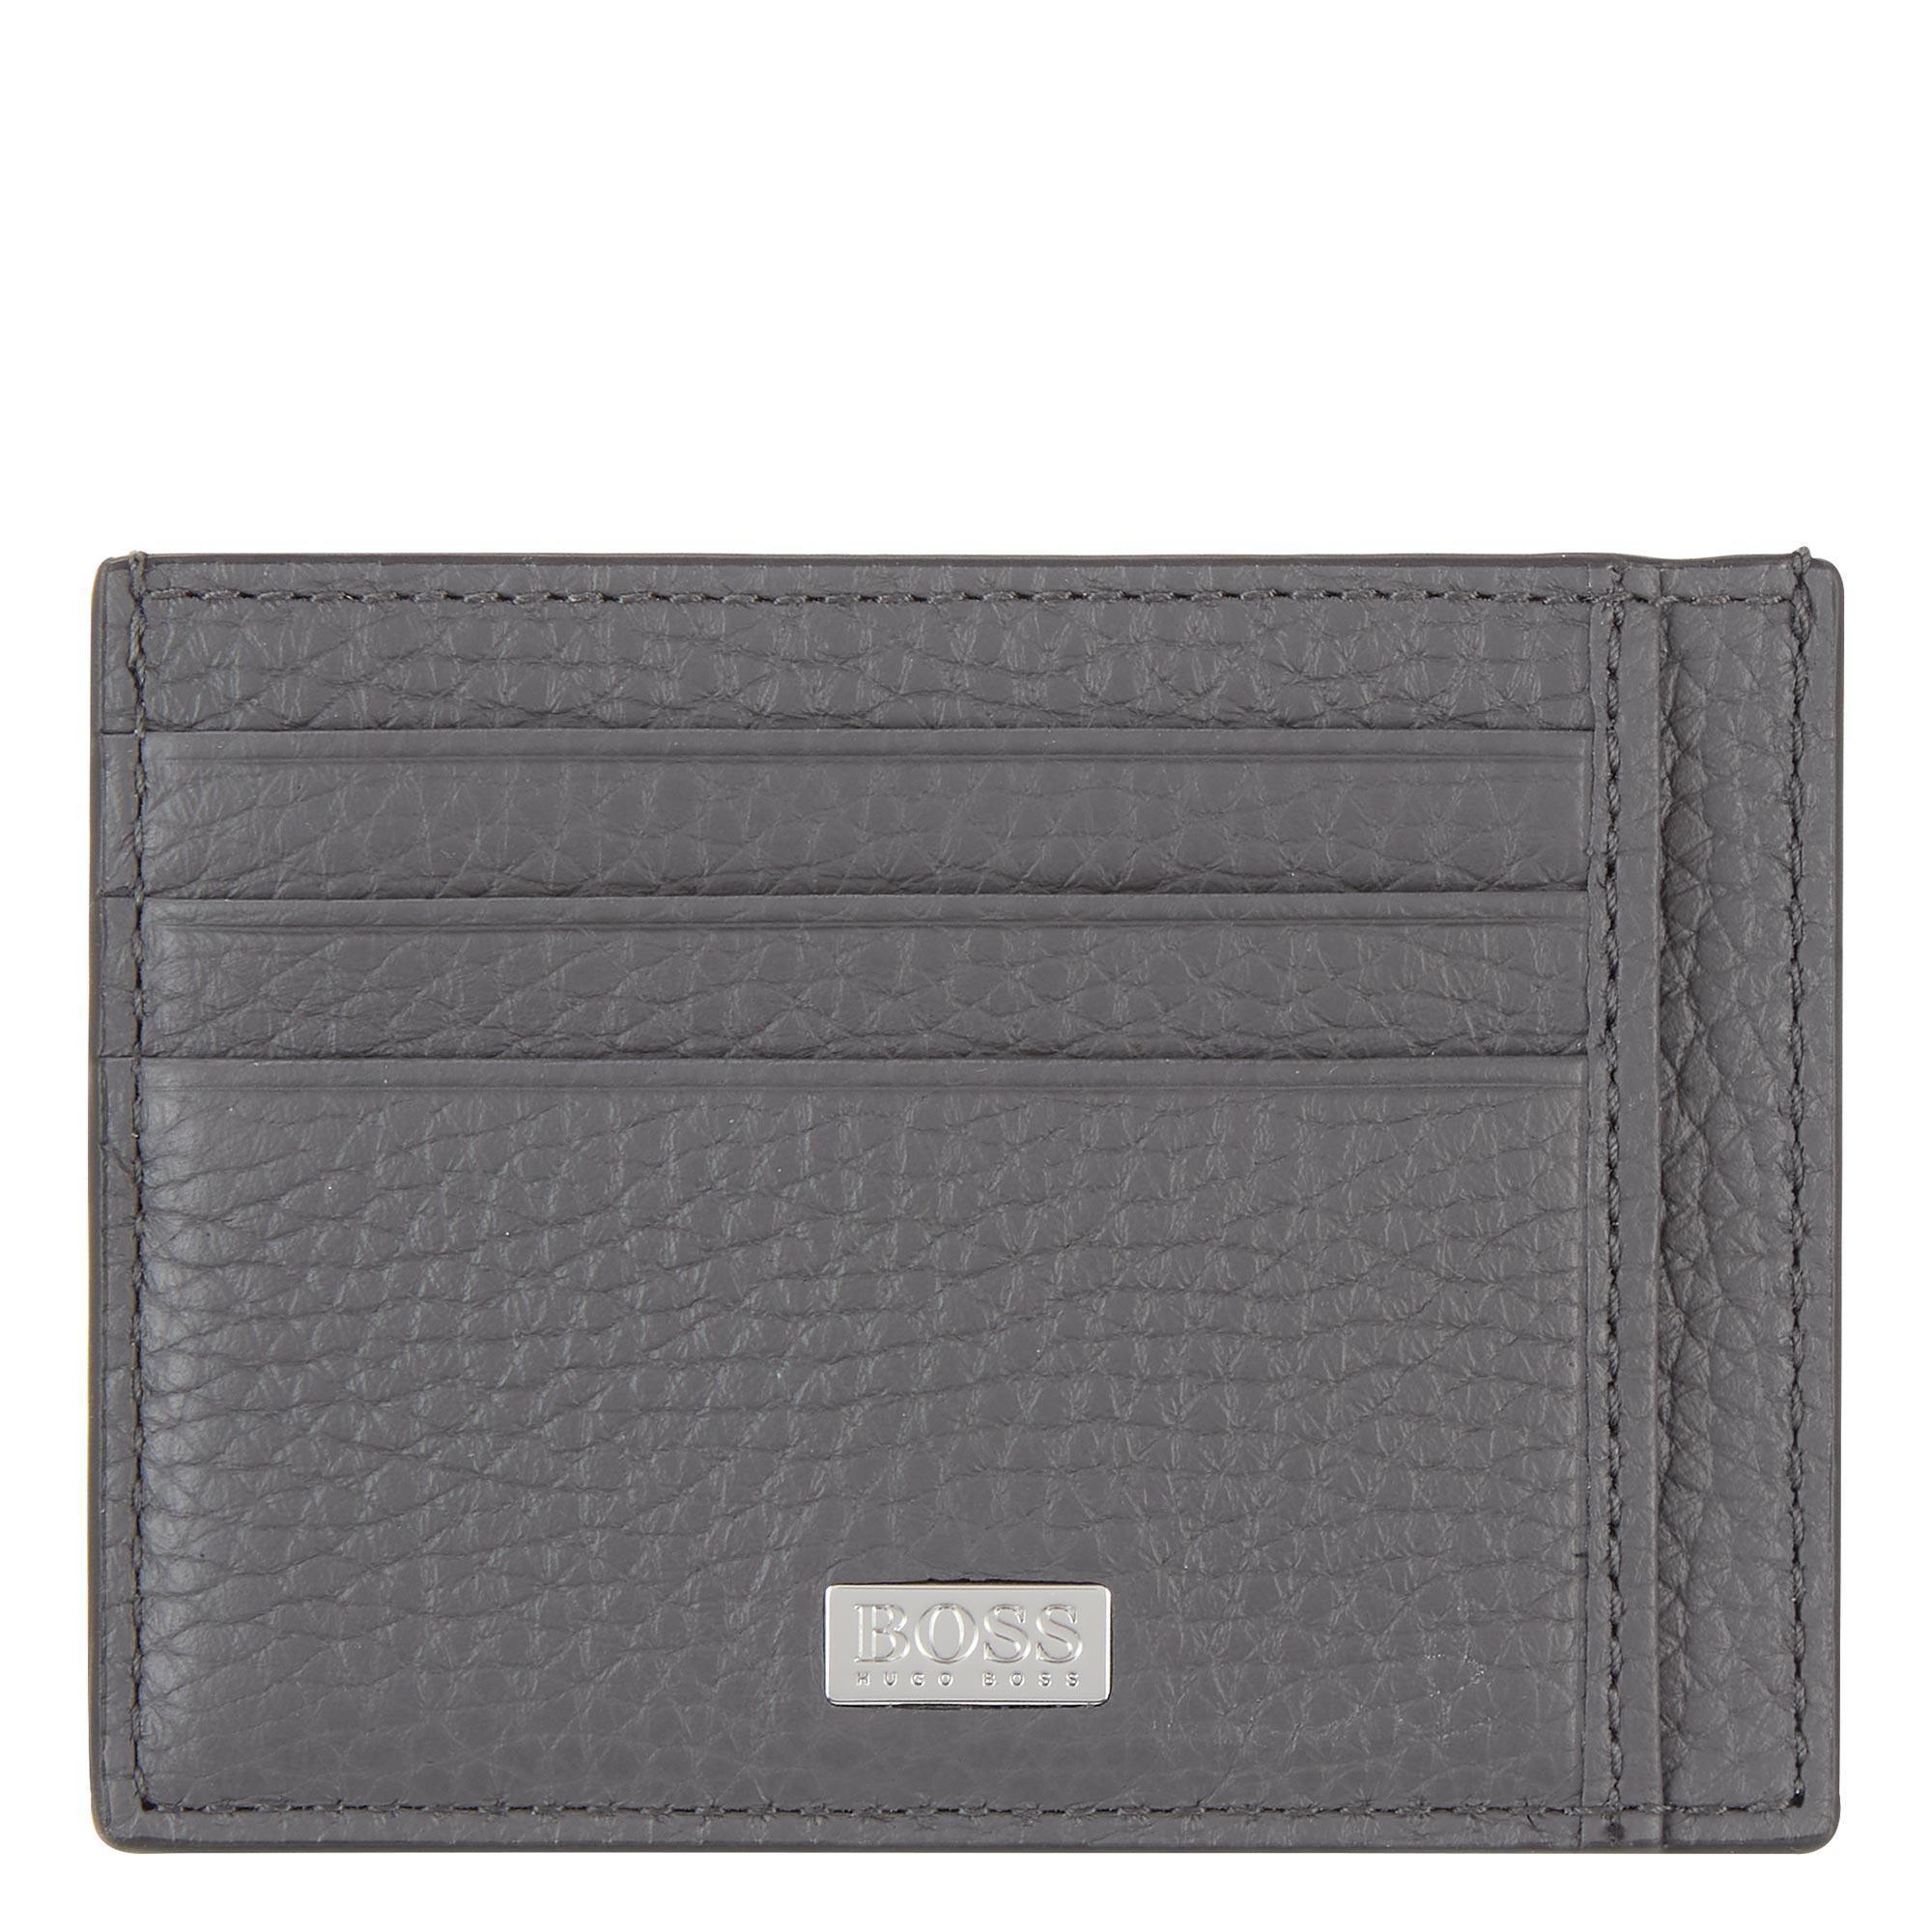 Crosstown Leather Cardholder